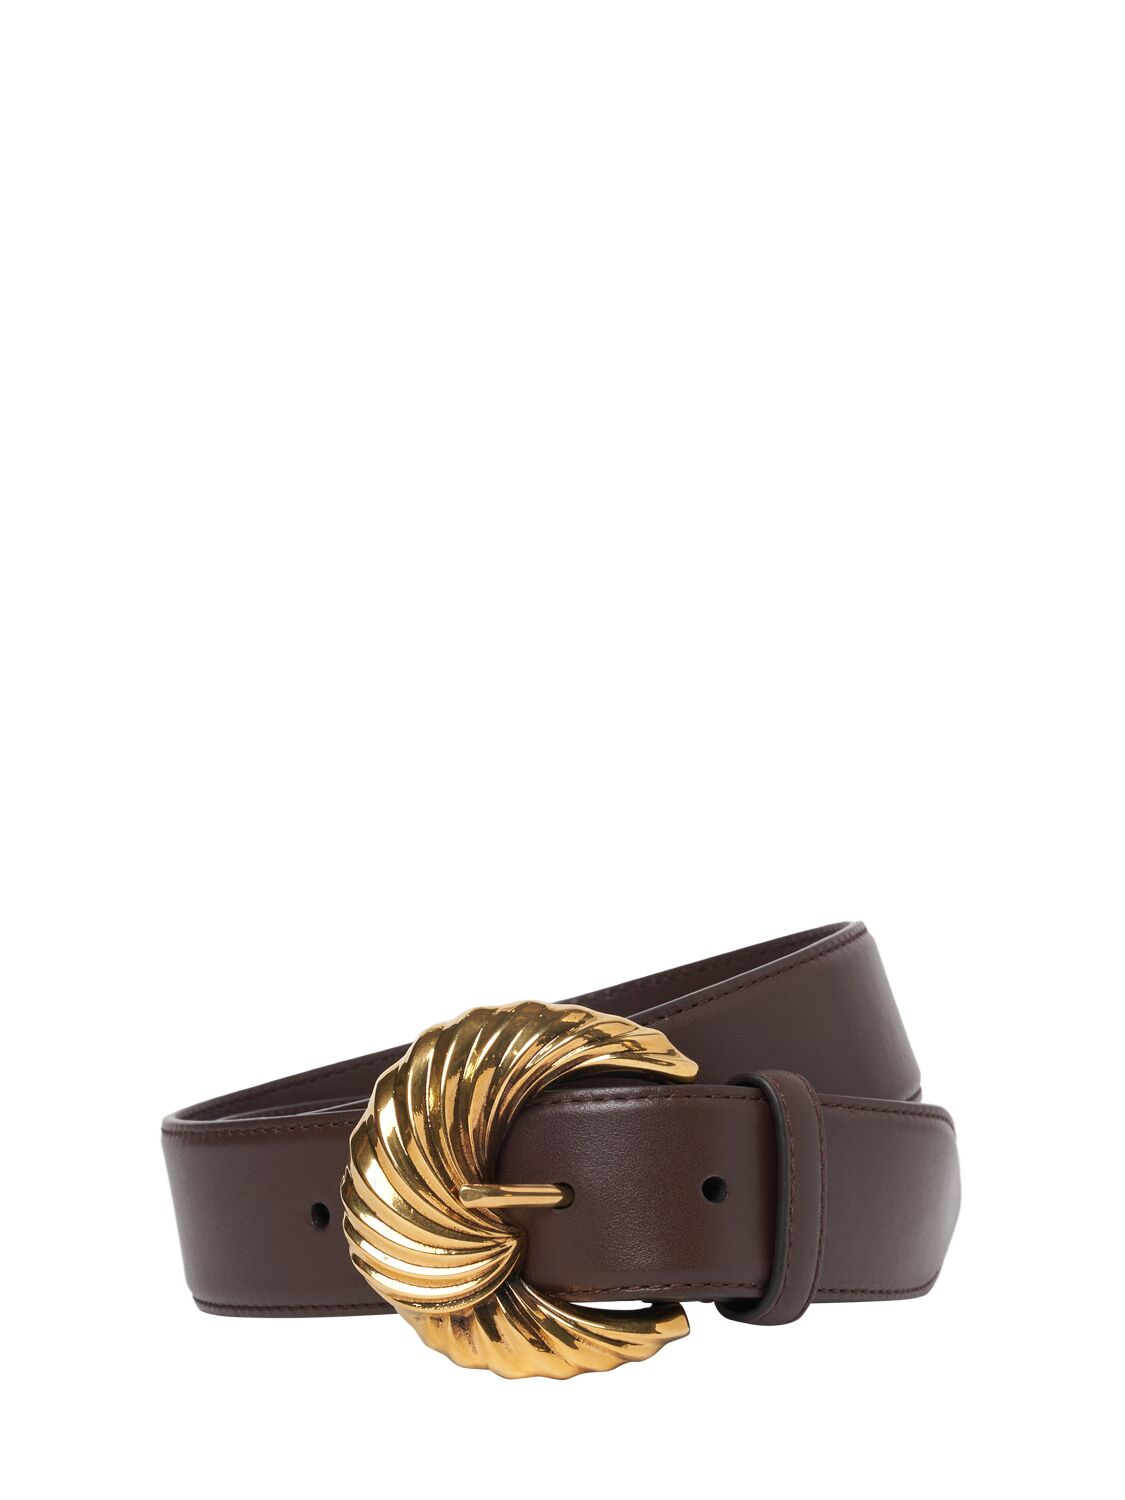 Etro Paisley Buckle Leather Belt In M0019 Brown